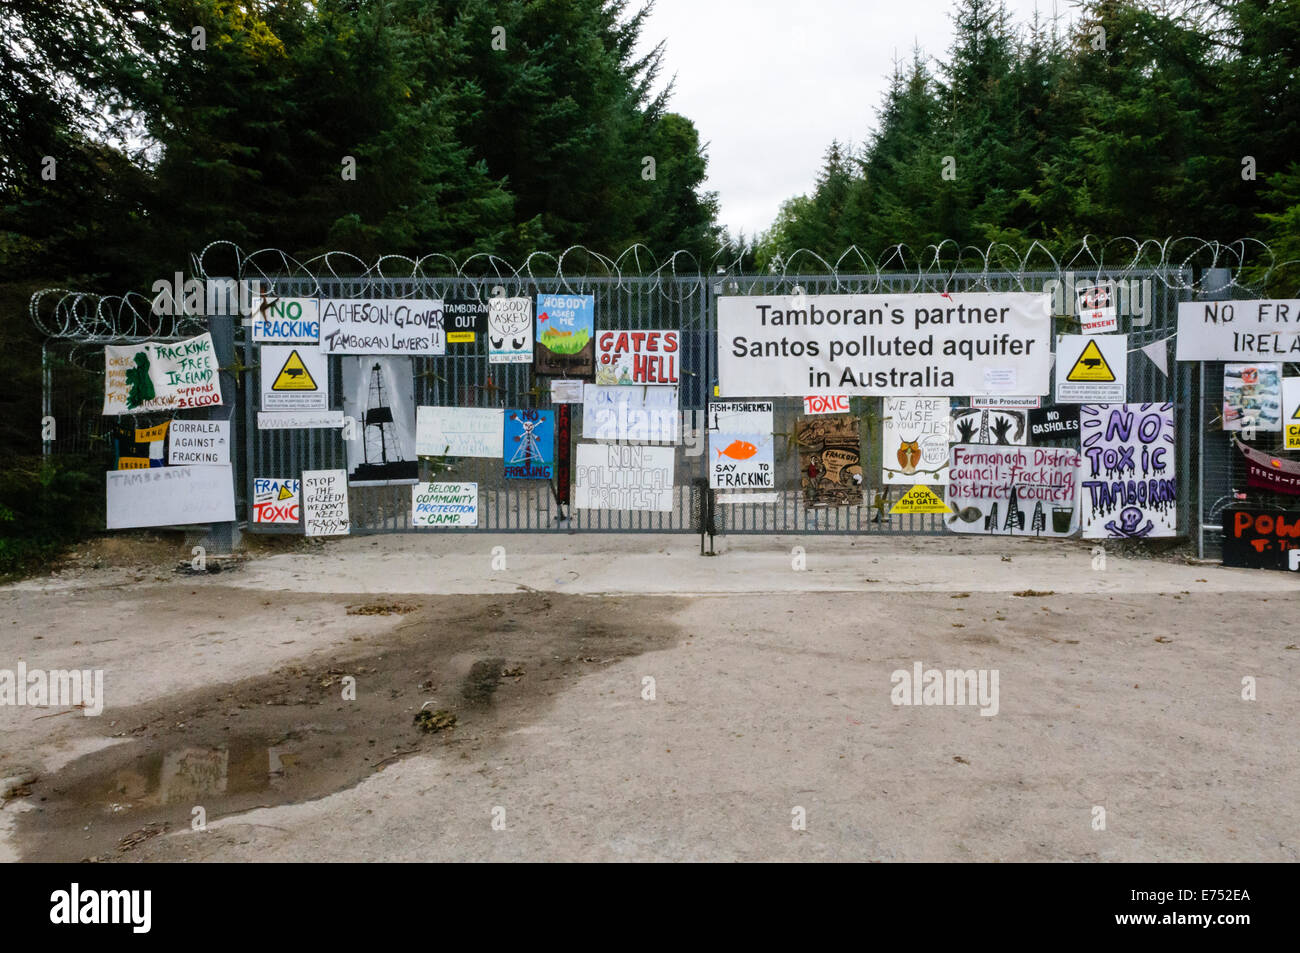 Belcoo, Northern Ireland. 2nd September 2014 - Anti-Fracking campaign at quarry owned by Tamboran Stock Photo